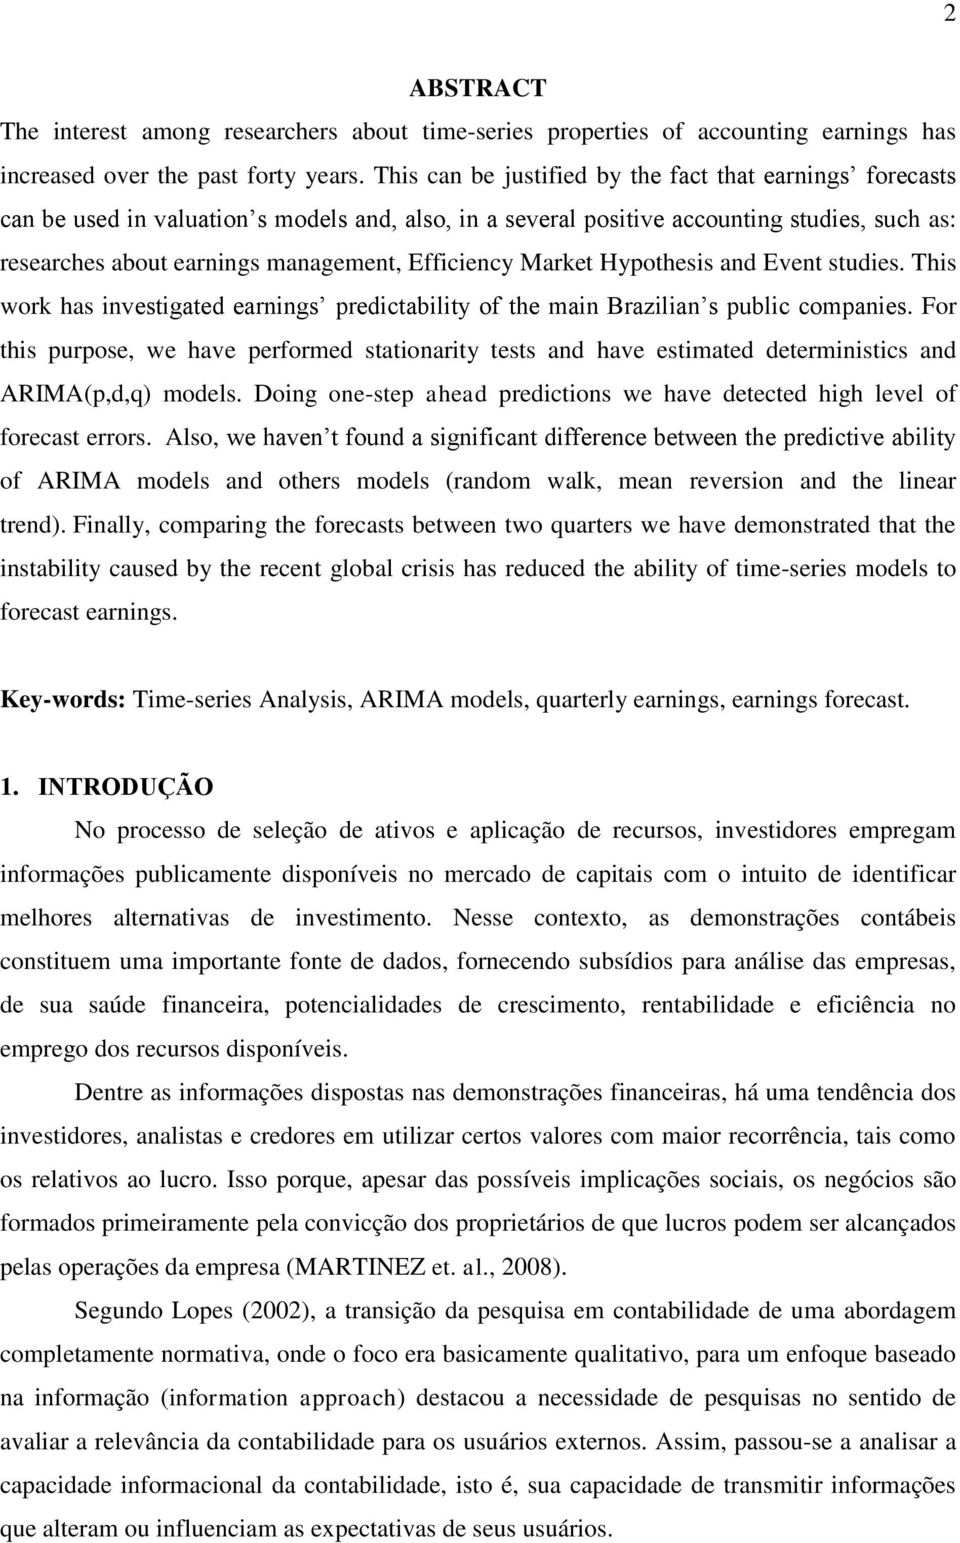 Hypohesis and Even sudies. This work has invesigaed earnings predicabiliy of he main Brazilian s public companies.